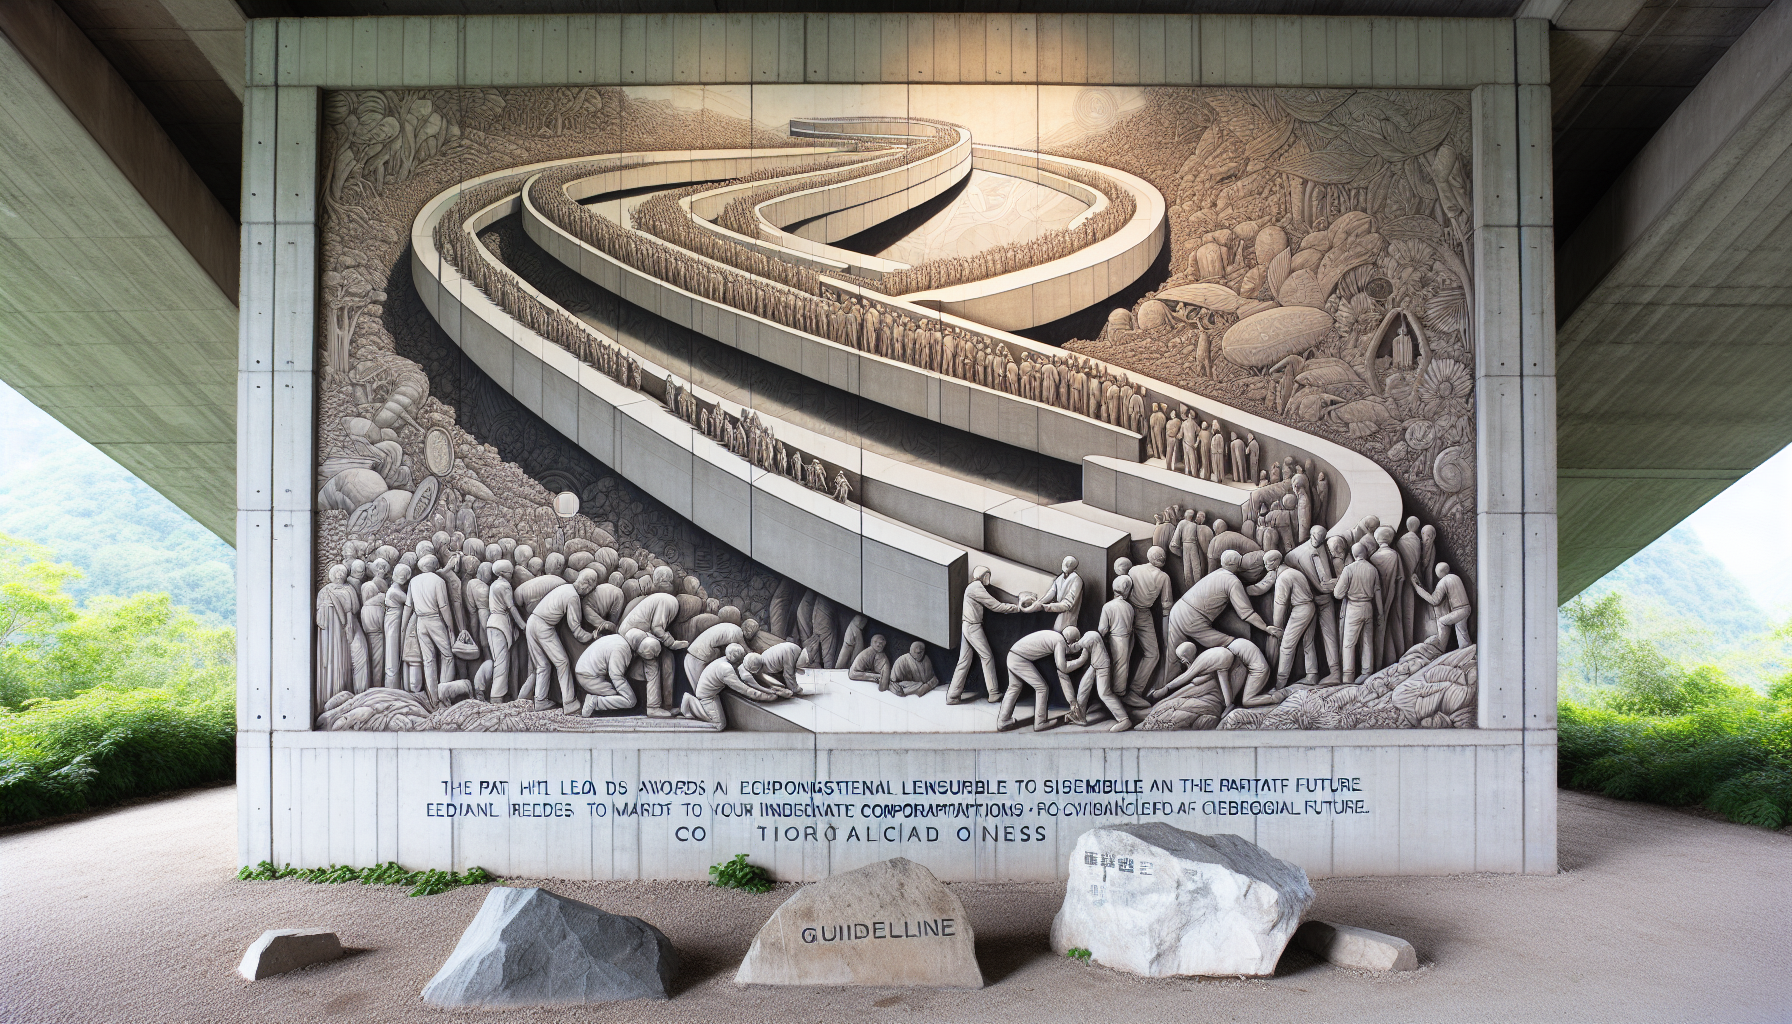 A mural depicting company's core values and mission statement